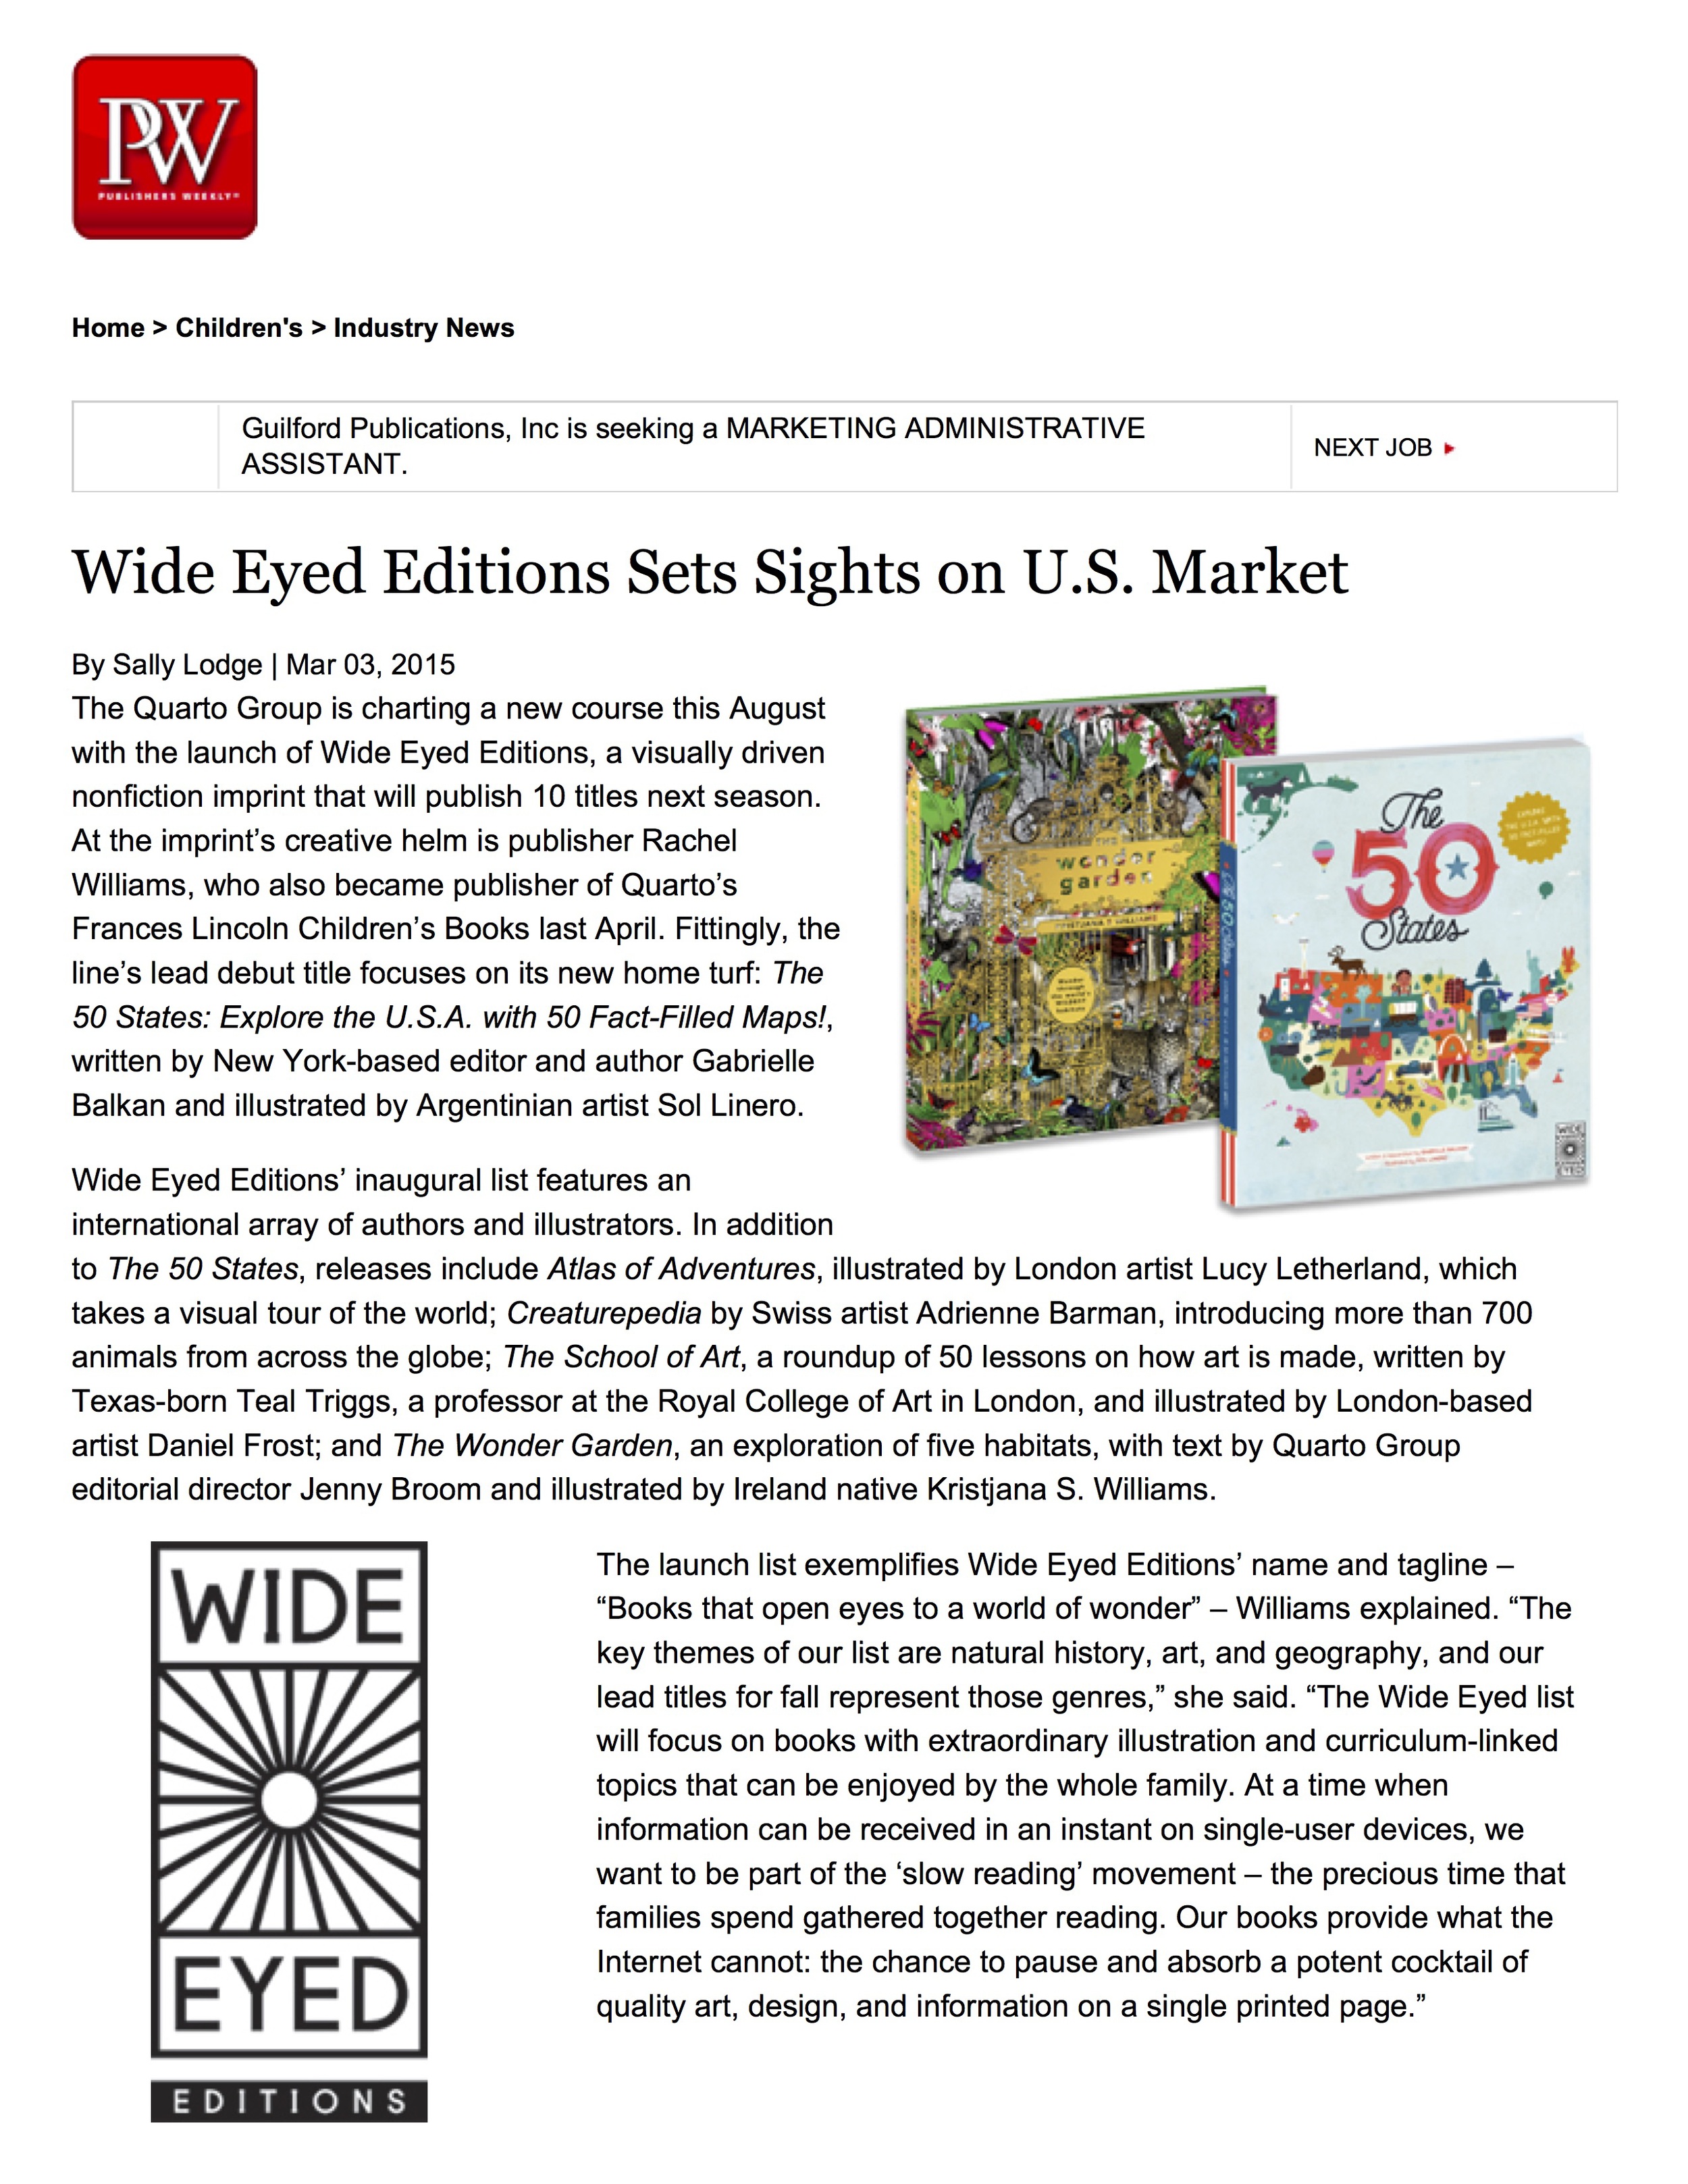 PW_Wide Eyed Editions Sets Sights on U.jpg